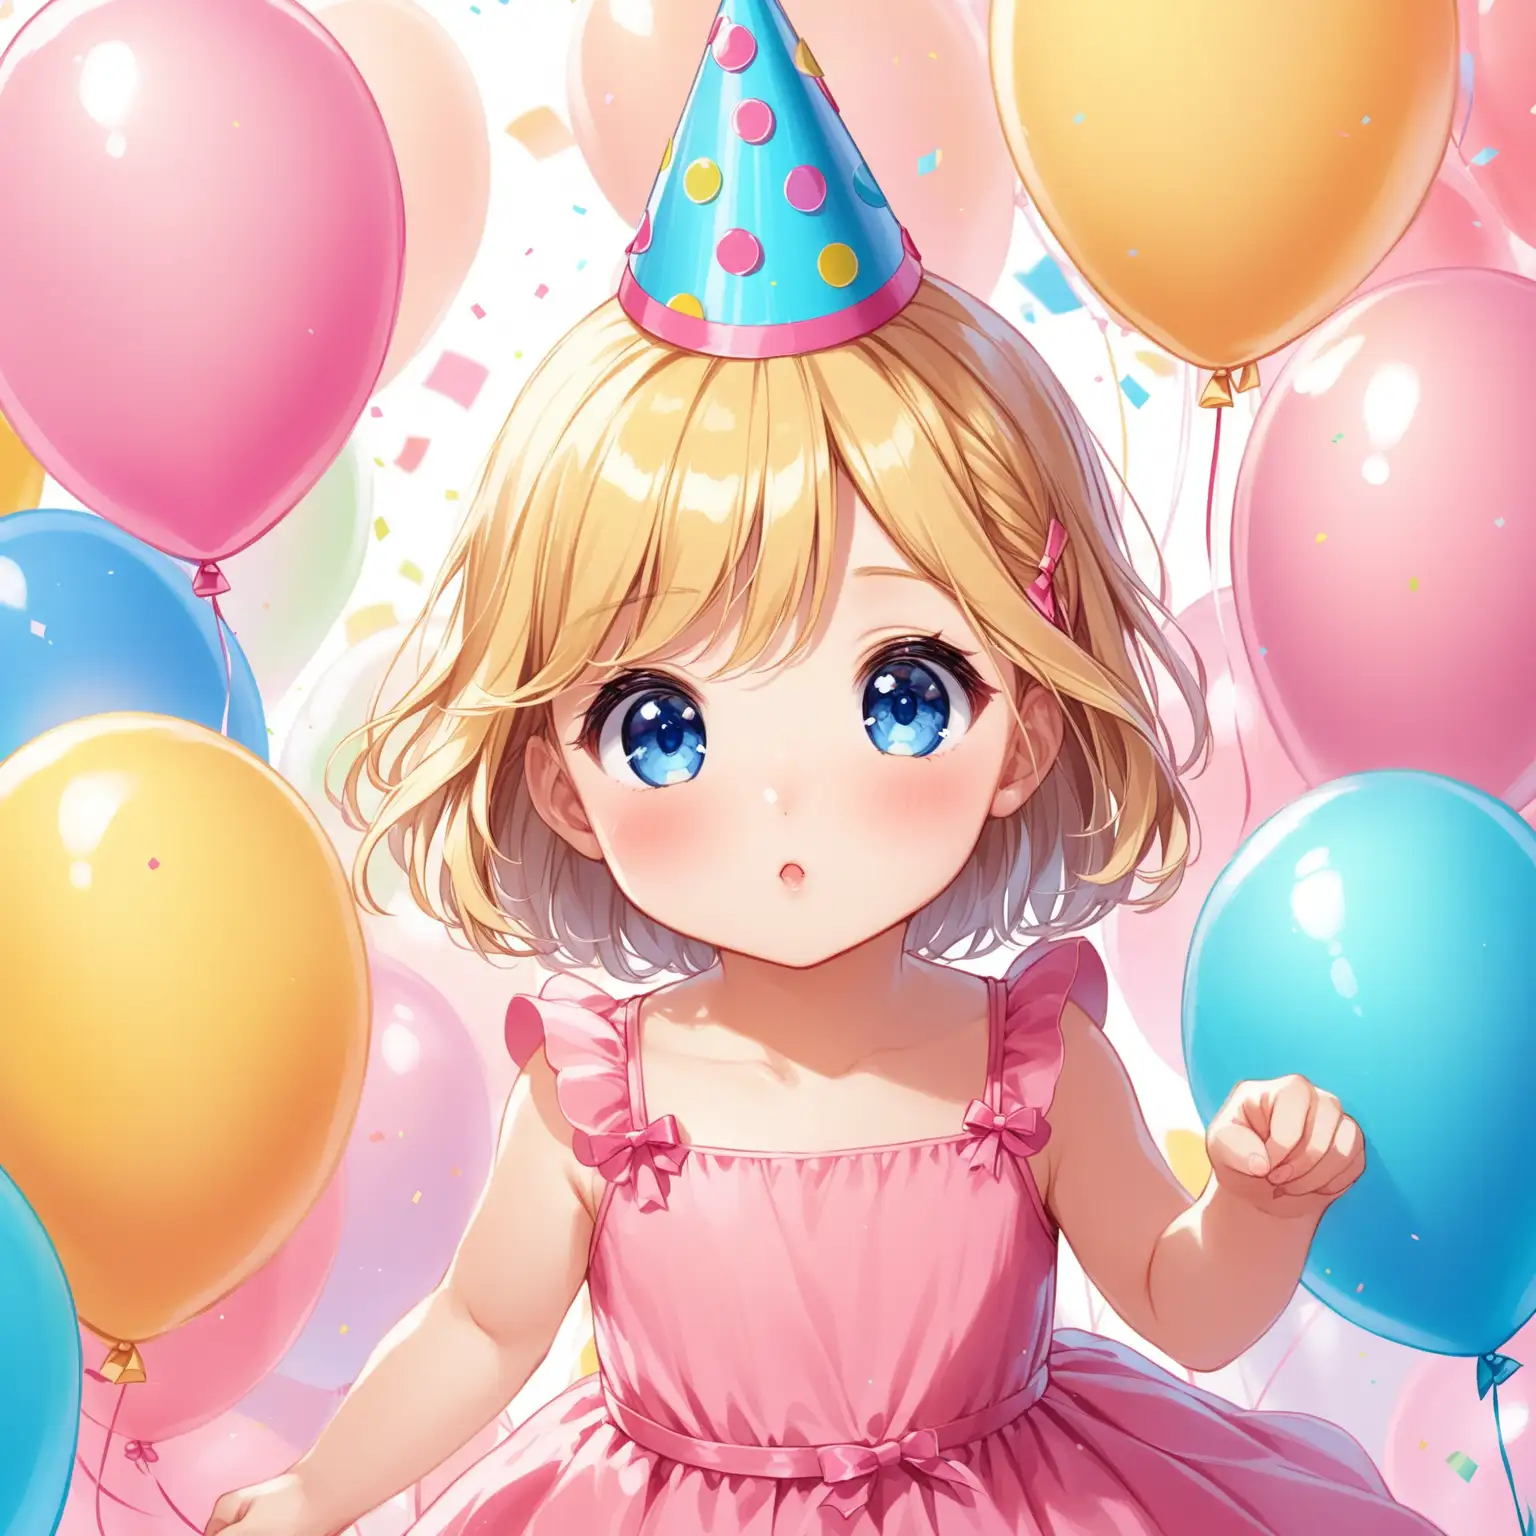 little girl at a birthday party,  a with a dress,  blonde hair, blue eyes, pink balloons, party hat, 